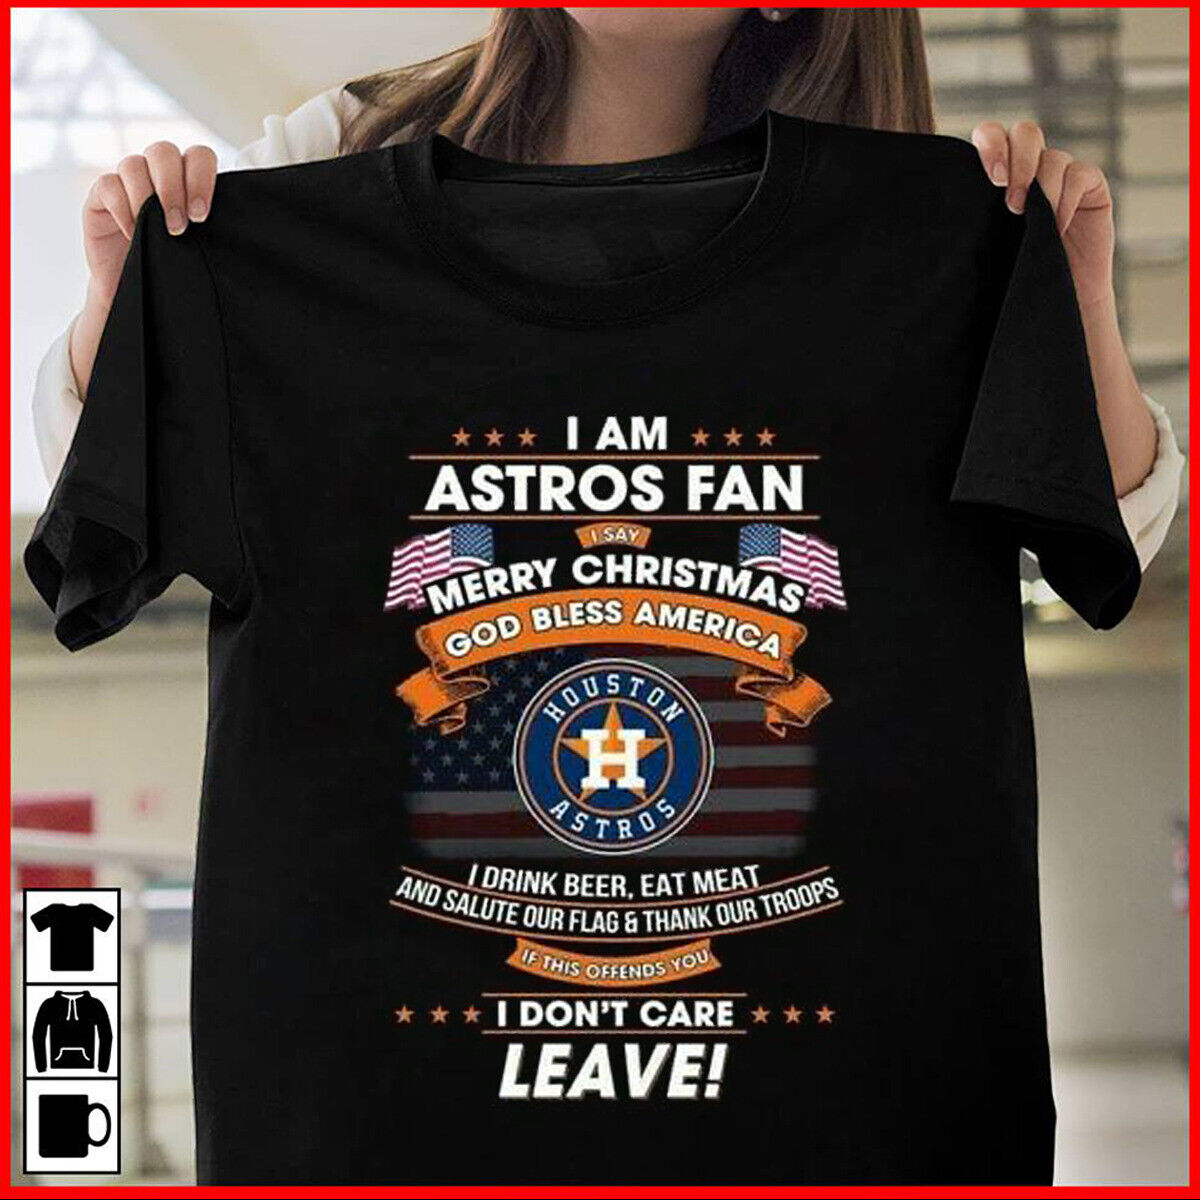 Houston Astros T-shirt Baseball Mlb Team Sport Funny Navy Cotton Tee Gift Fans Full Size Up To 5xl